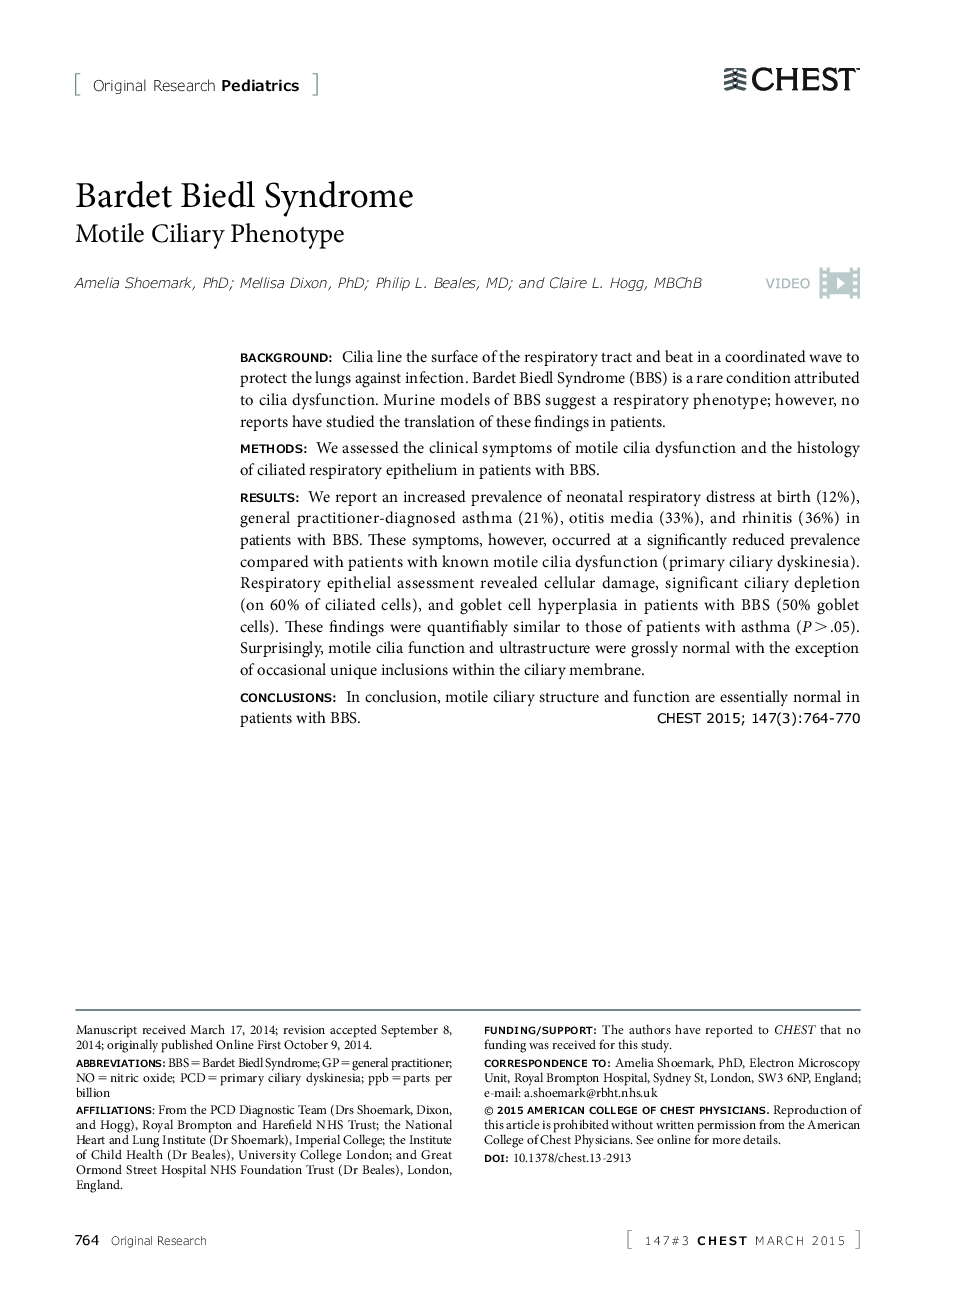 Bardet Biedl Syndrome : Motile Ciliary Phenotype